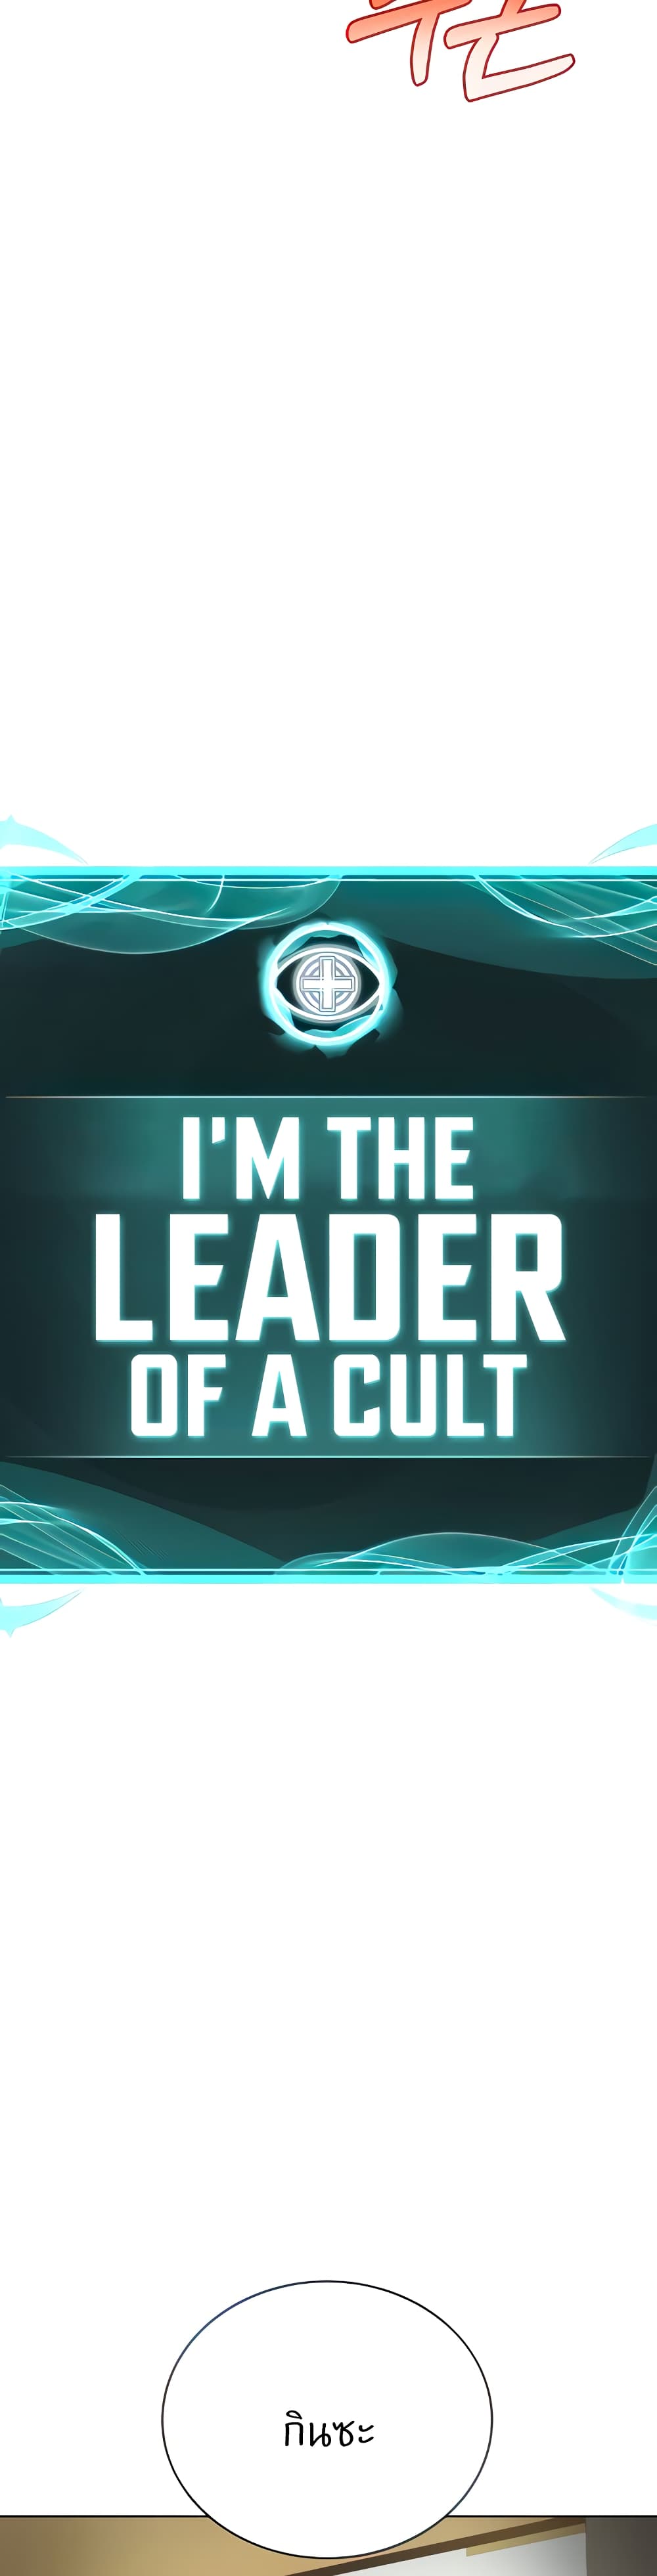 I’m The Leader Of A Cult 18 (7)